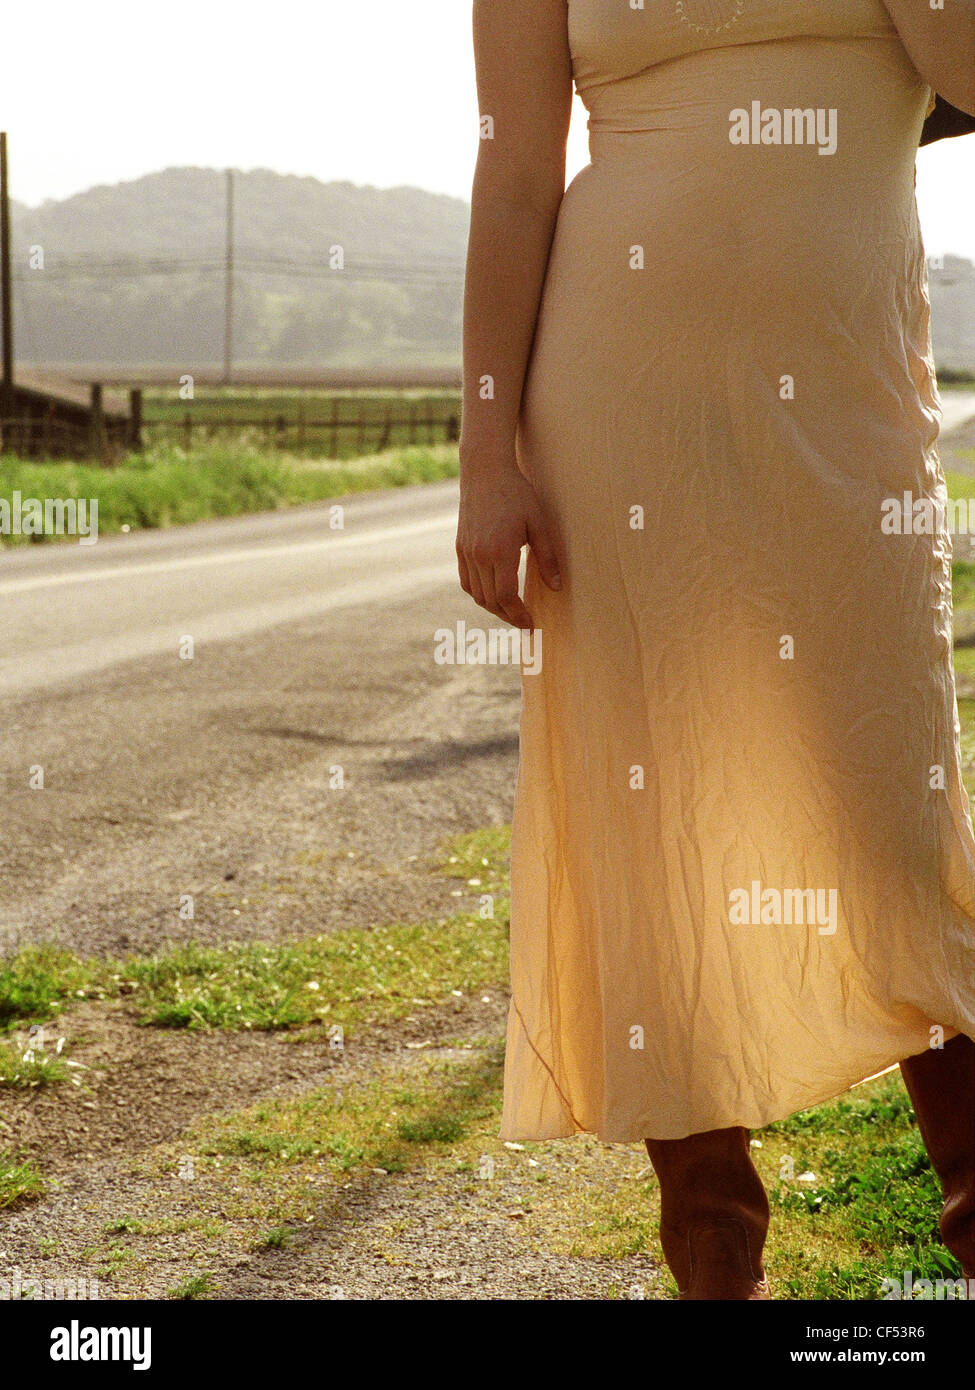 Female wearing crumpled peach dress tan leather boots Standing by the side of a road Rural scene in background Light showing Stock Photo